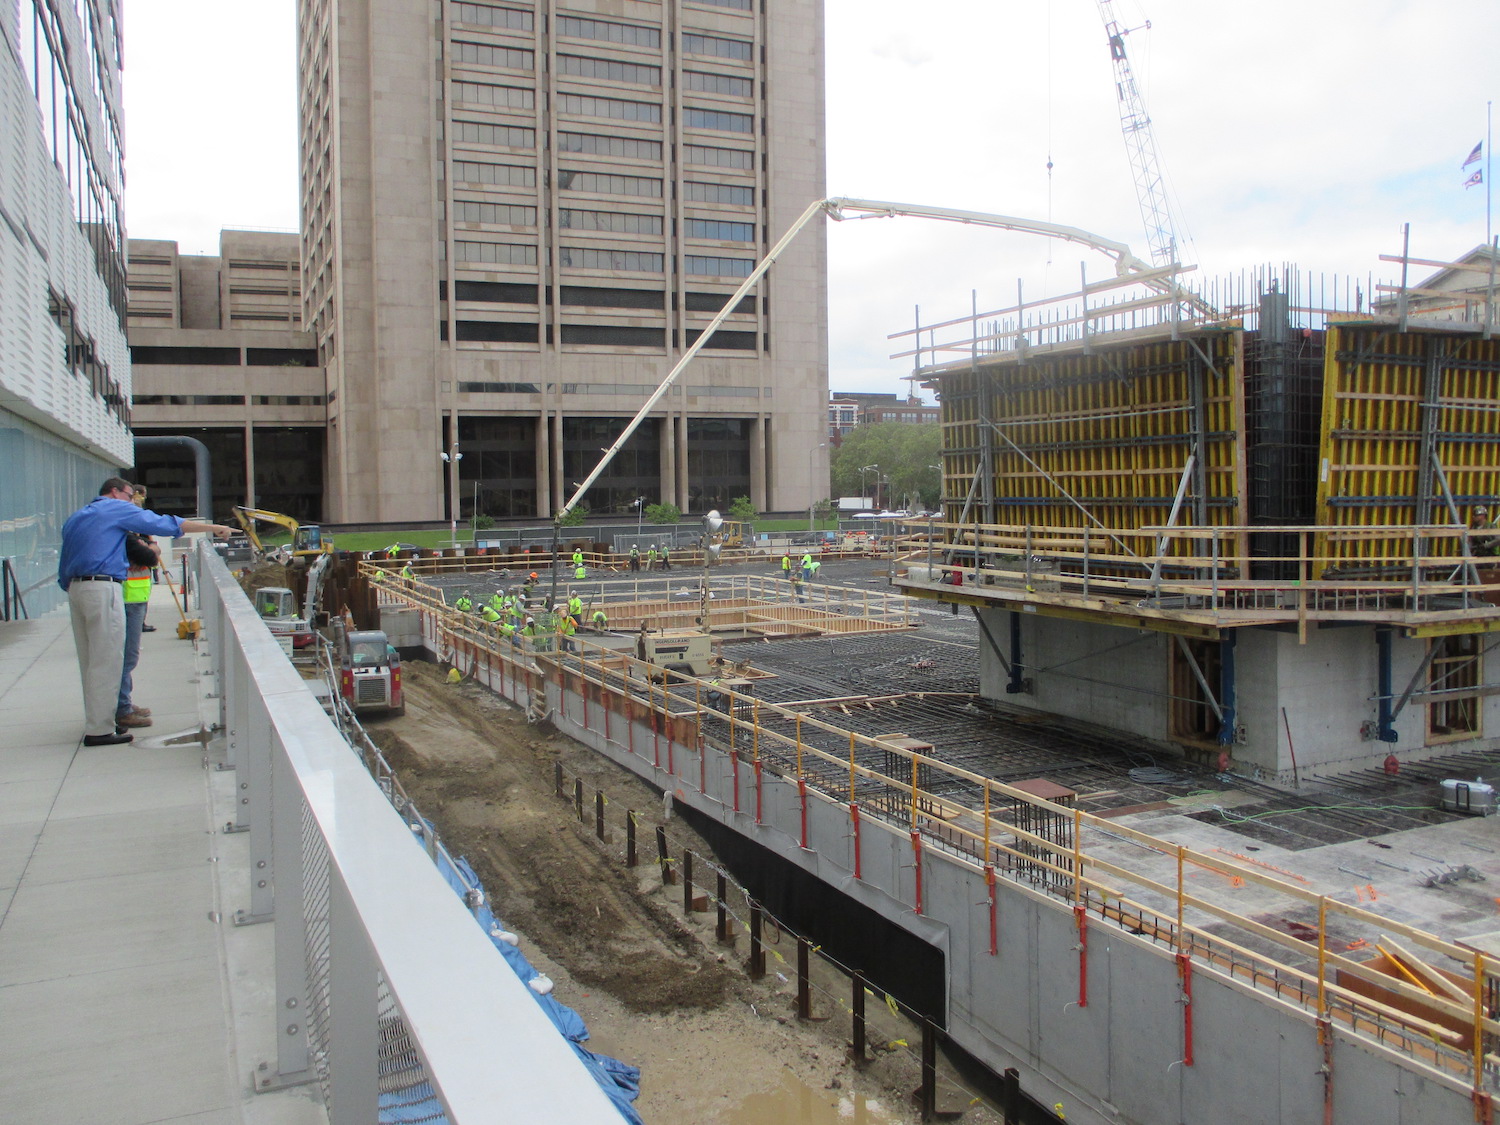 The beginning process of the Hilton Hotel process includes the construction workers laying the metal framing before pouring.